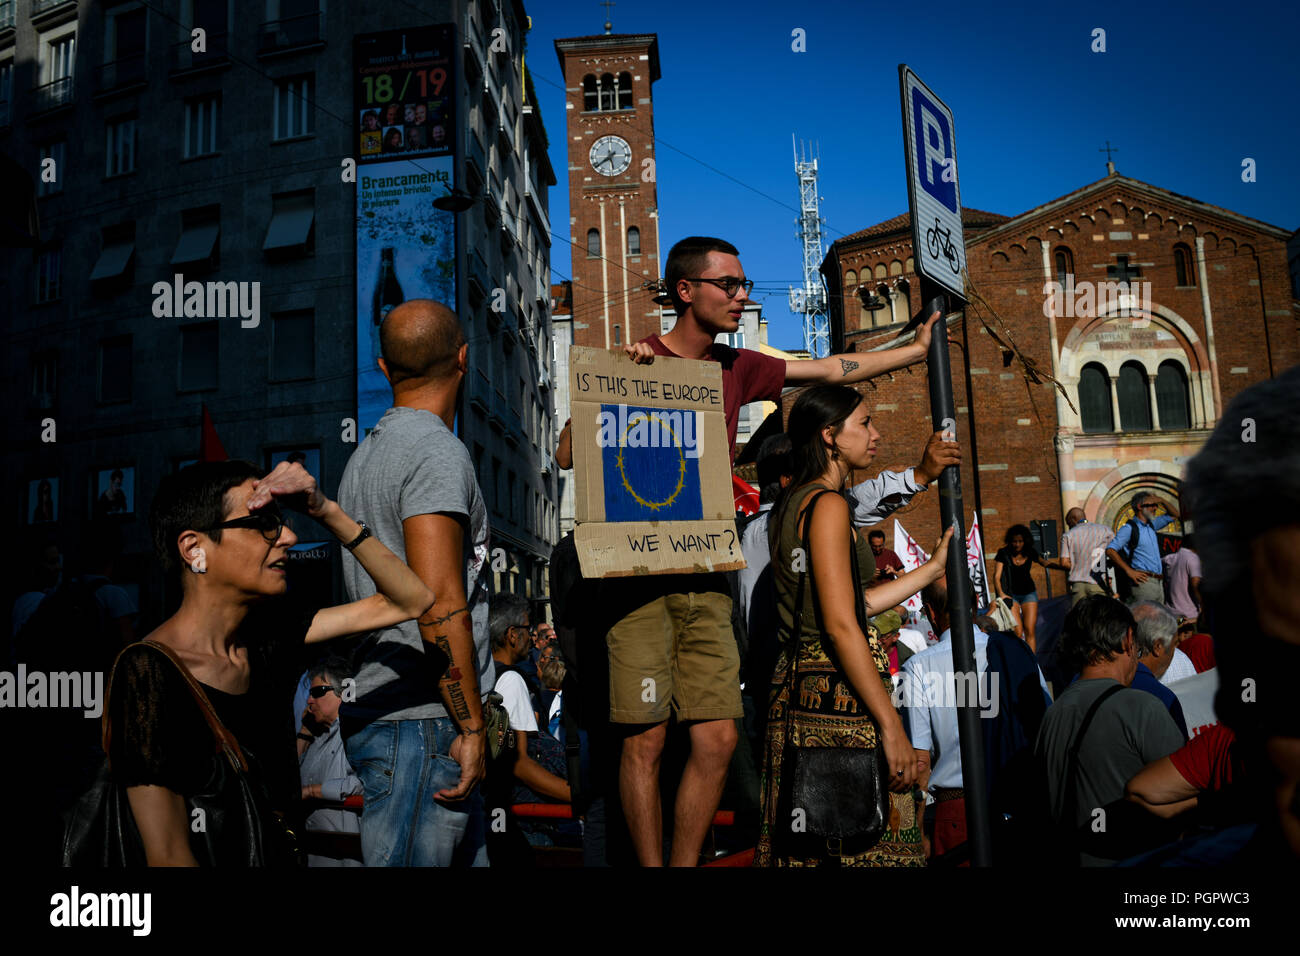 Milan, Italy. 28th Aug 2018. A young man holds a placard reading 'Is this the Europe we want?' during a protest called 'Europe without borders' against the meeting between Prime Minister of Hungary, Viktor Orbán and Italian Interior Minister Matteo Salvini in Milan, Italy on August 28, 2018 Credit: Piero Cruciatti/Alamy Live News Stock Photo